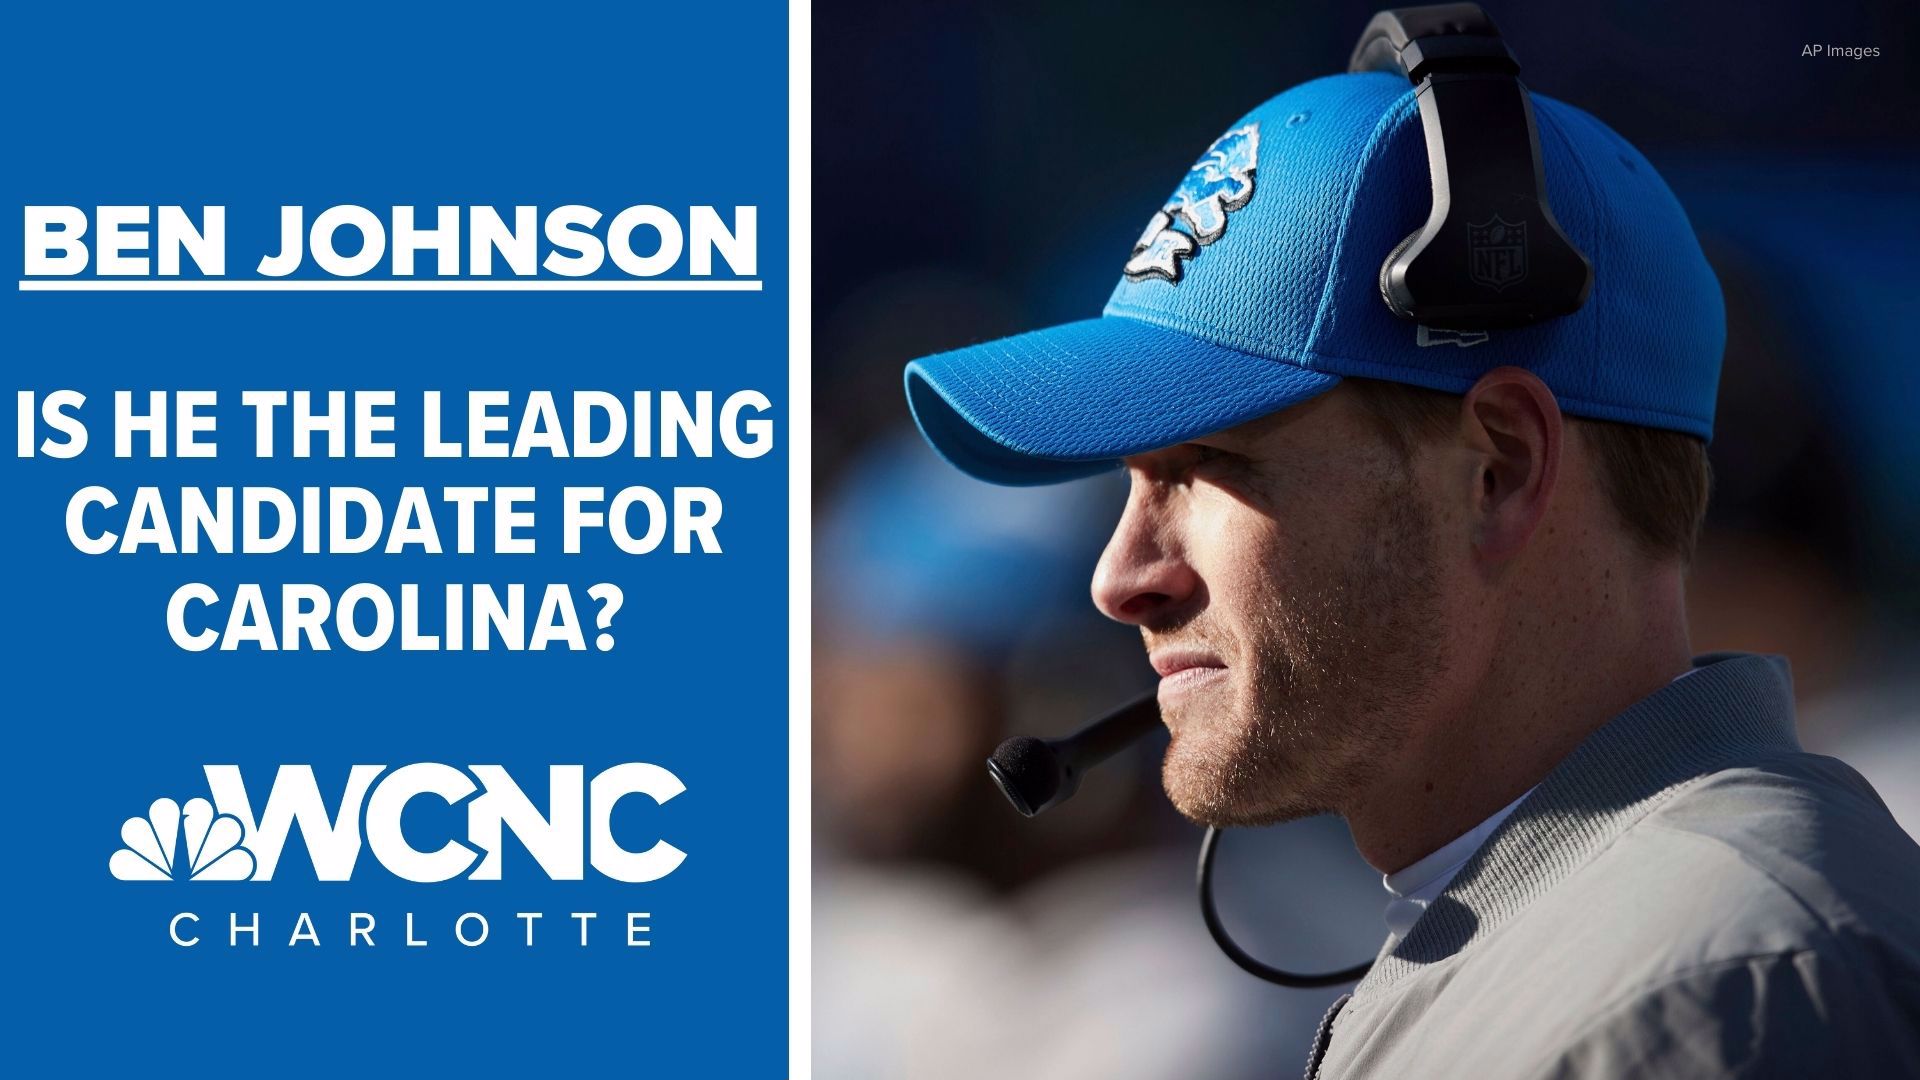 Detroit Lions offensive coordinator Ben Johnson is reportedly a leading candidate for the Carolina Panthers head coaching job. Would he be a good fit?